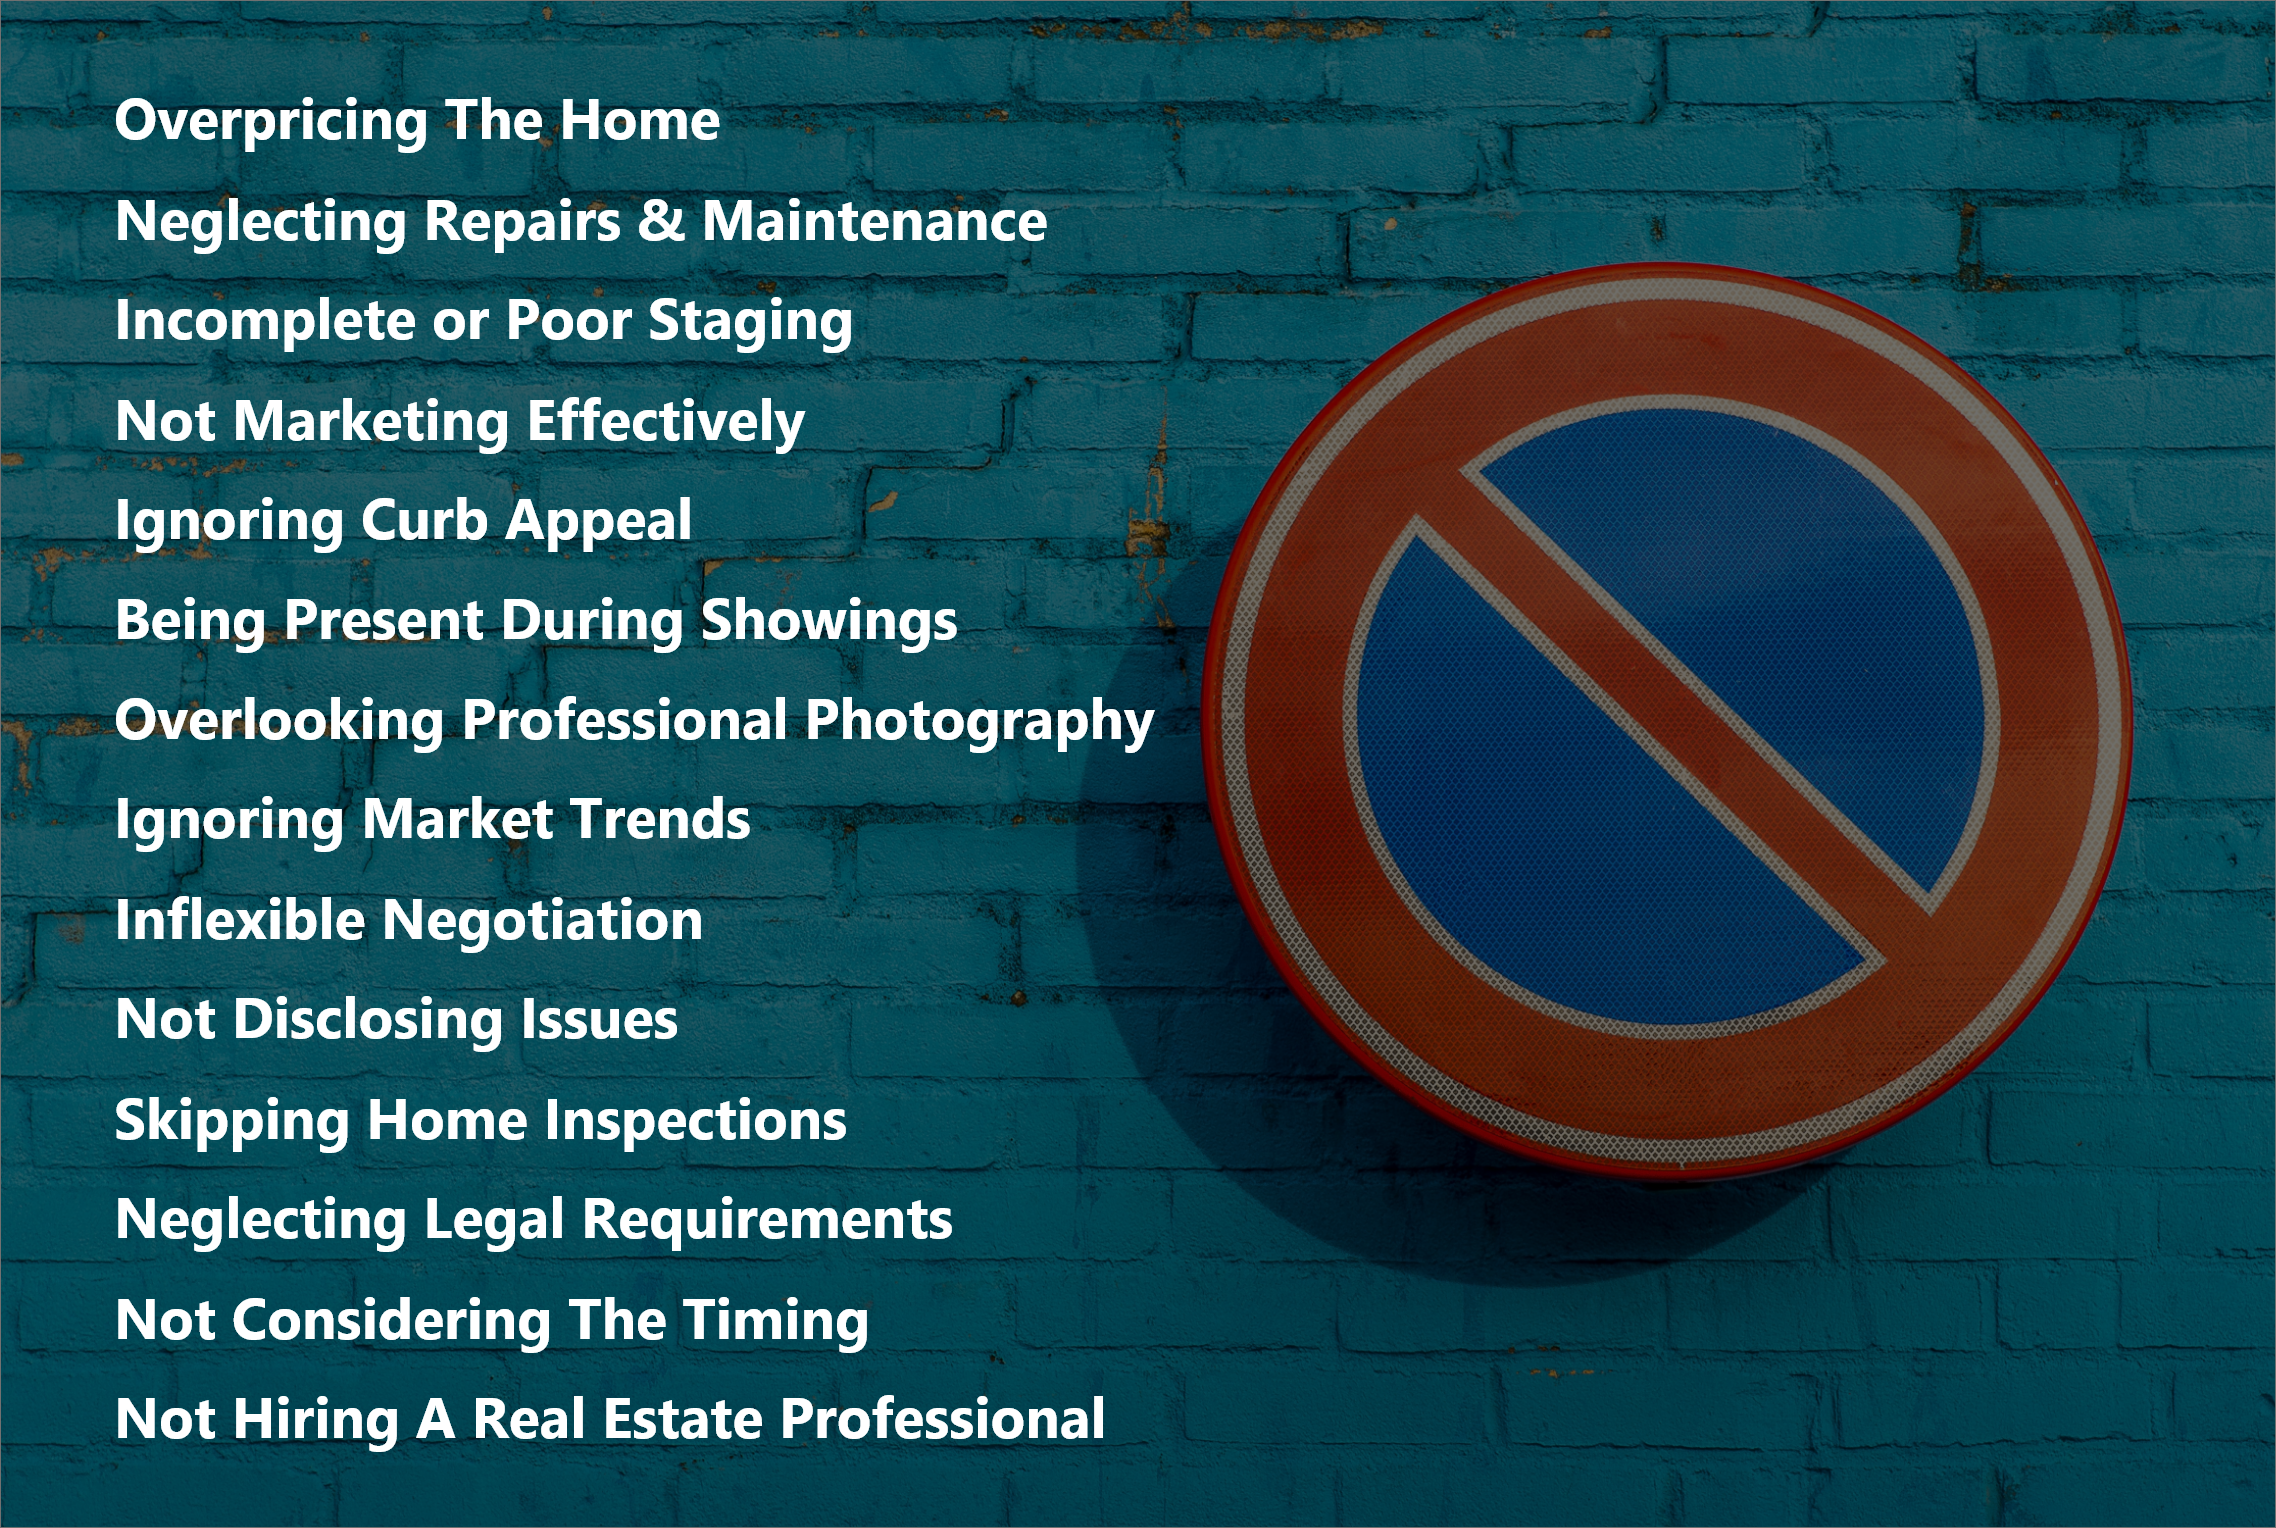 an infographic depicting all the common mistakes homeowners make while selling their home. 